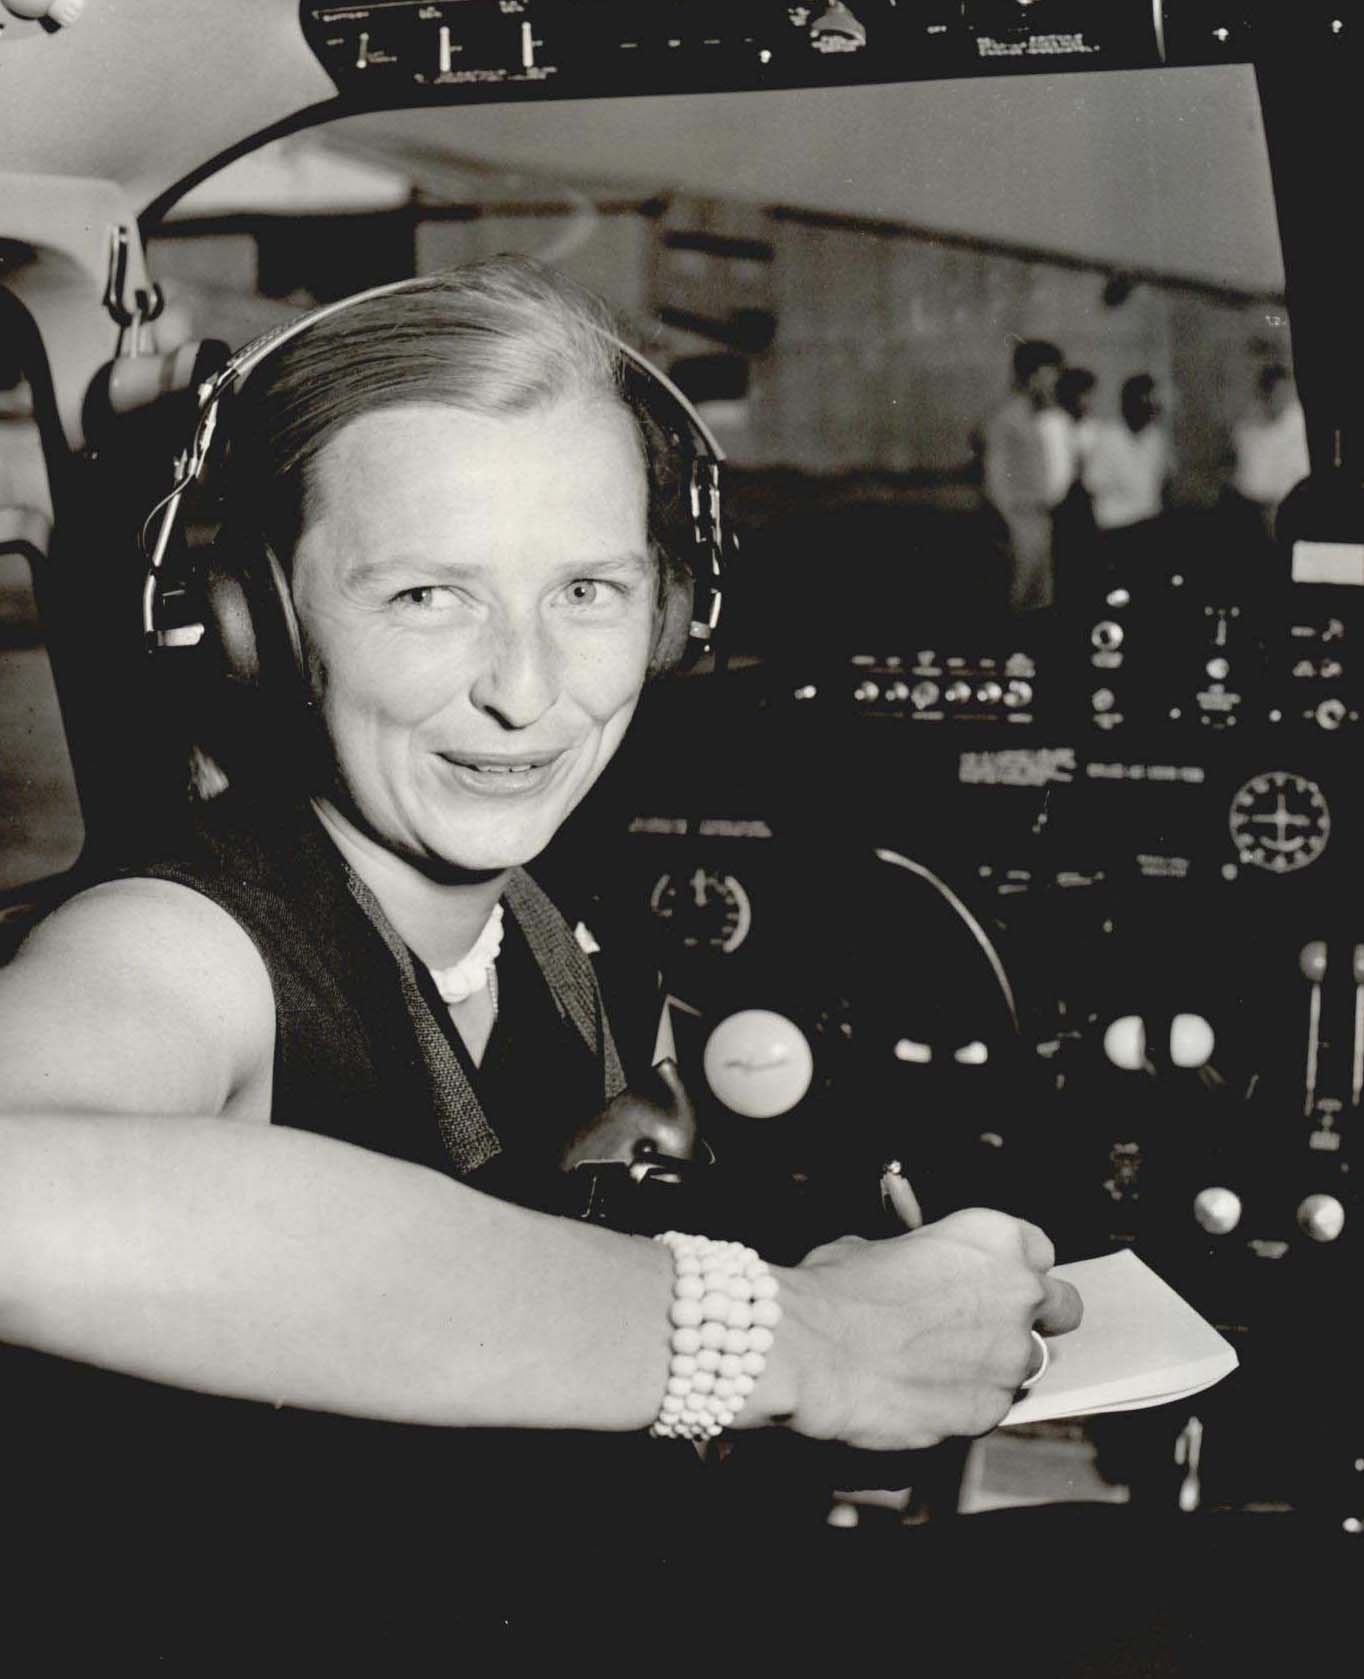 Aviator Jerrie Cobb sits in the cockpit of an aircraft wearing headphones as she smiles at the camera